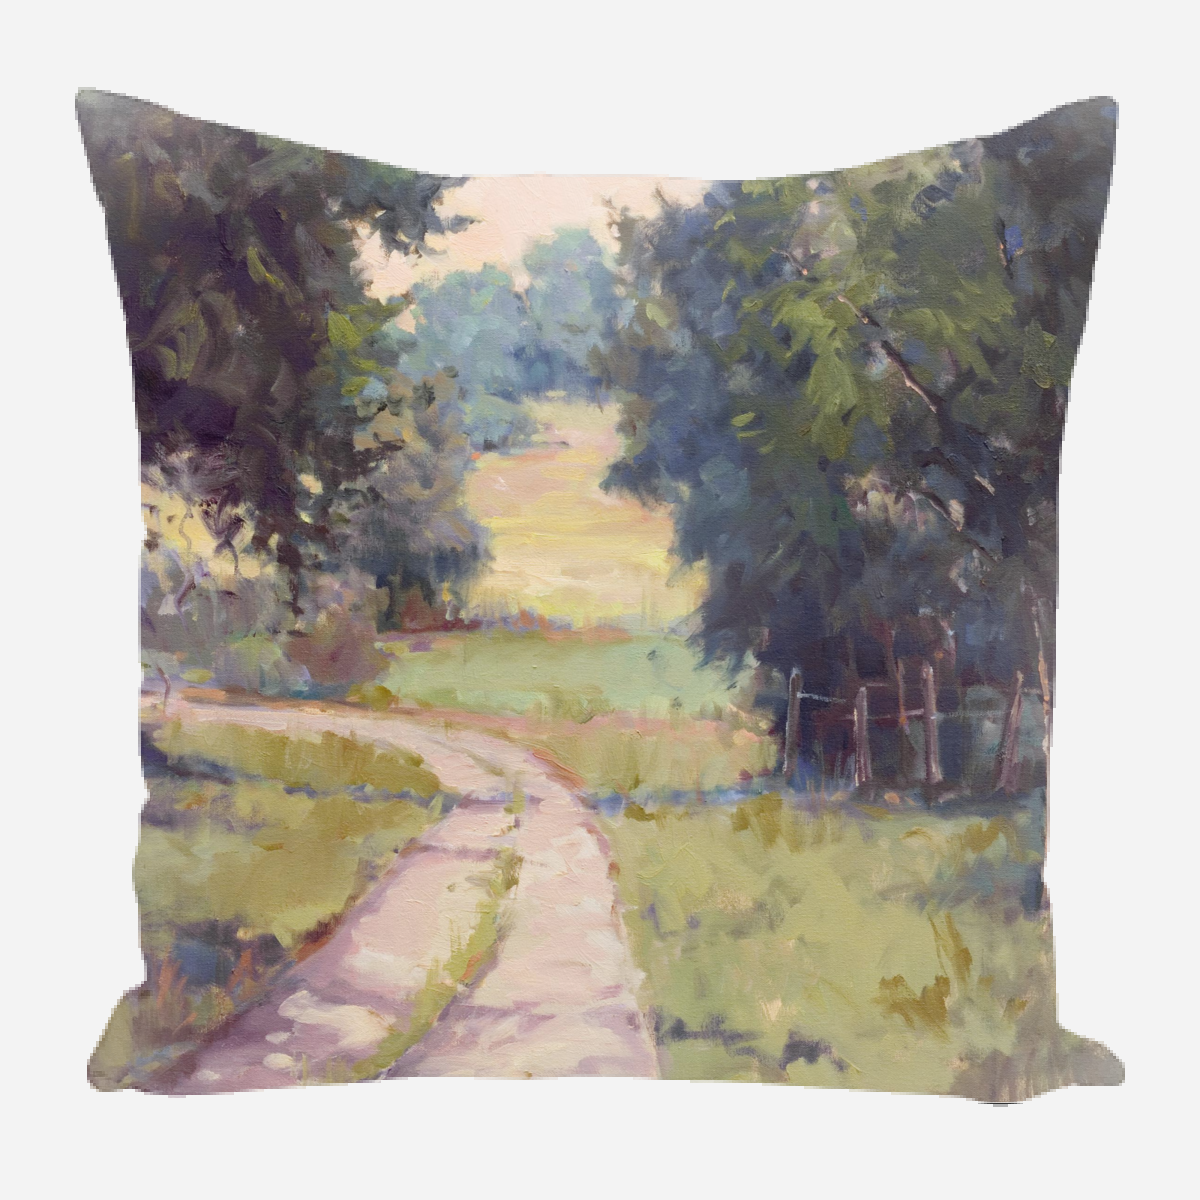 Around the Bend Pillow